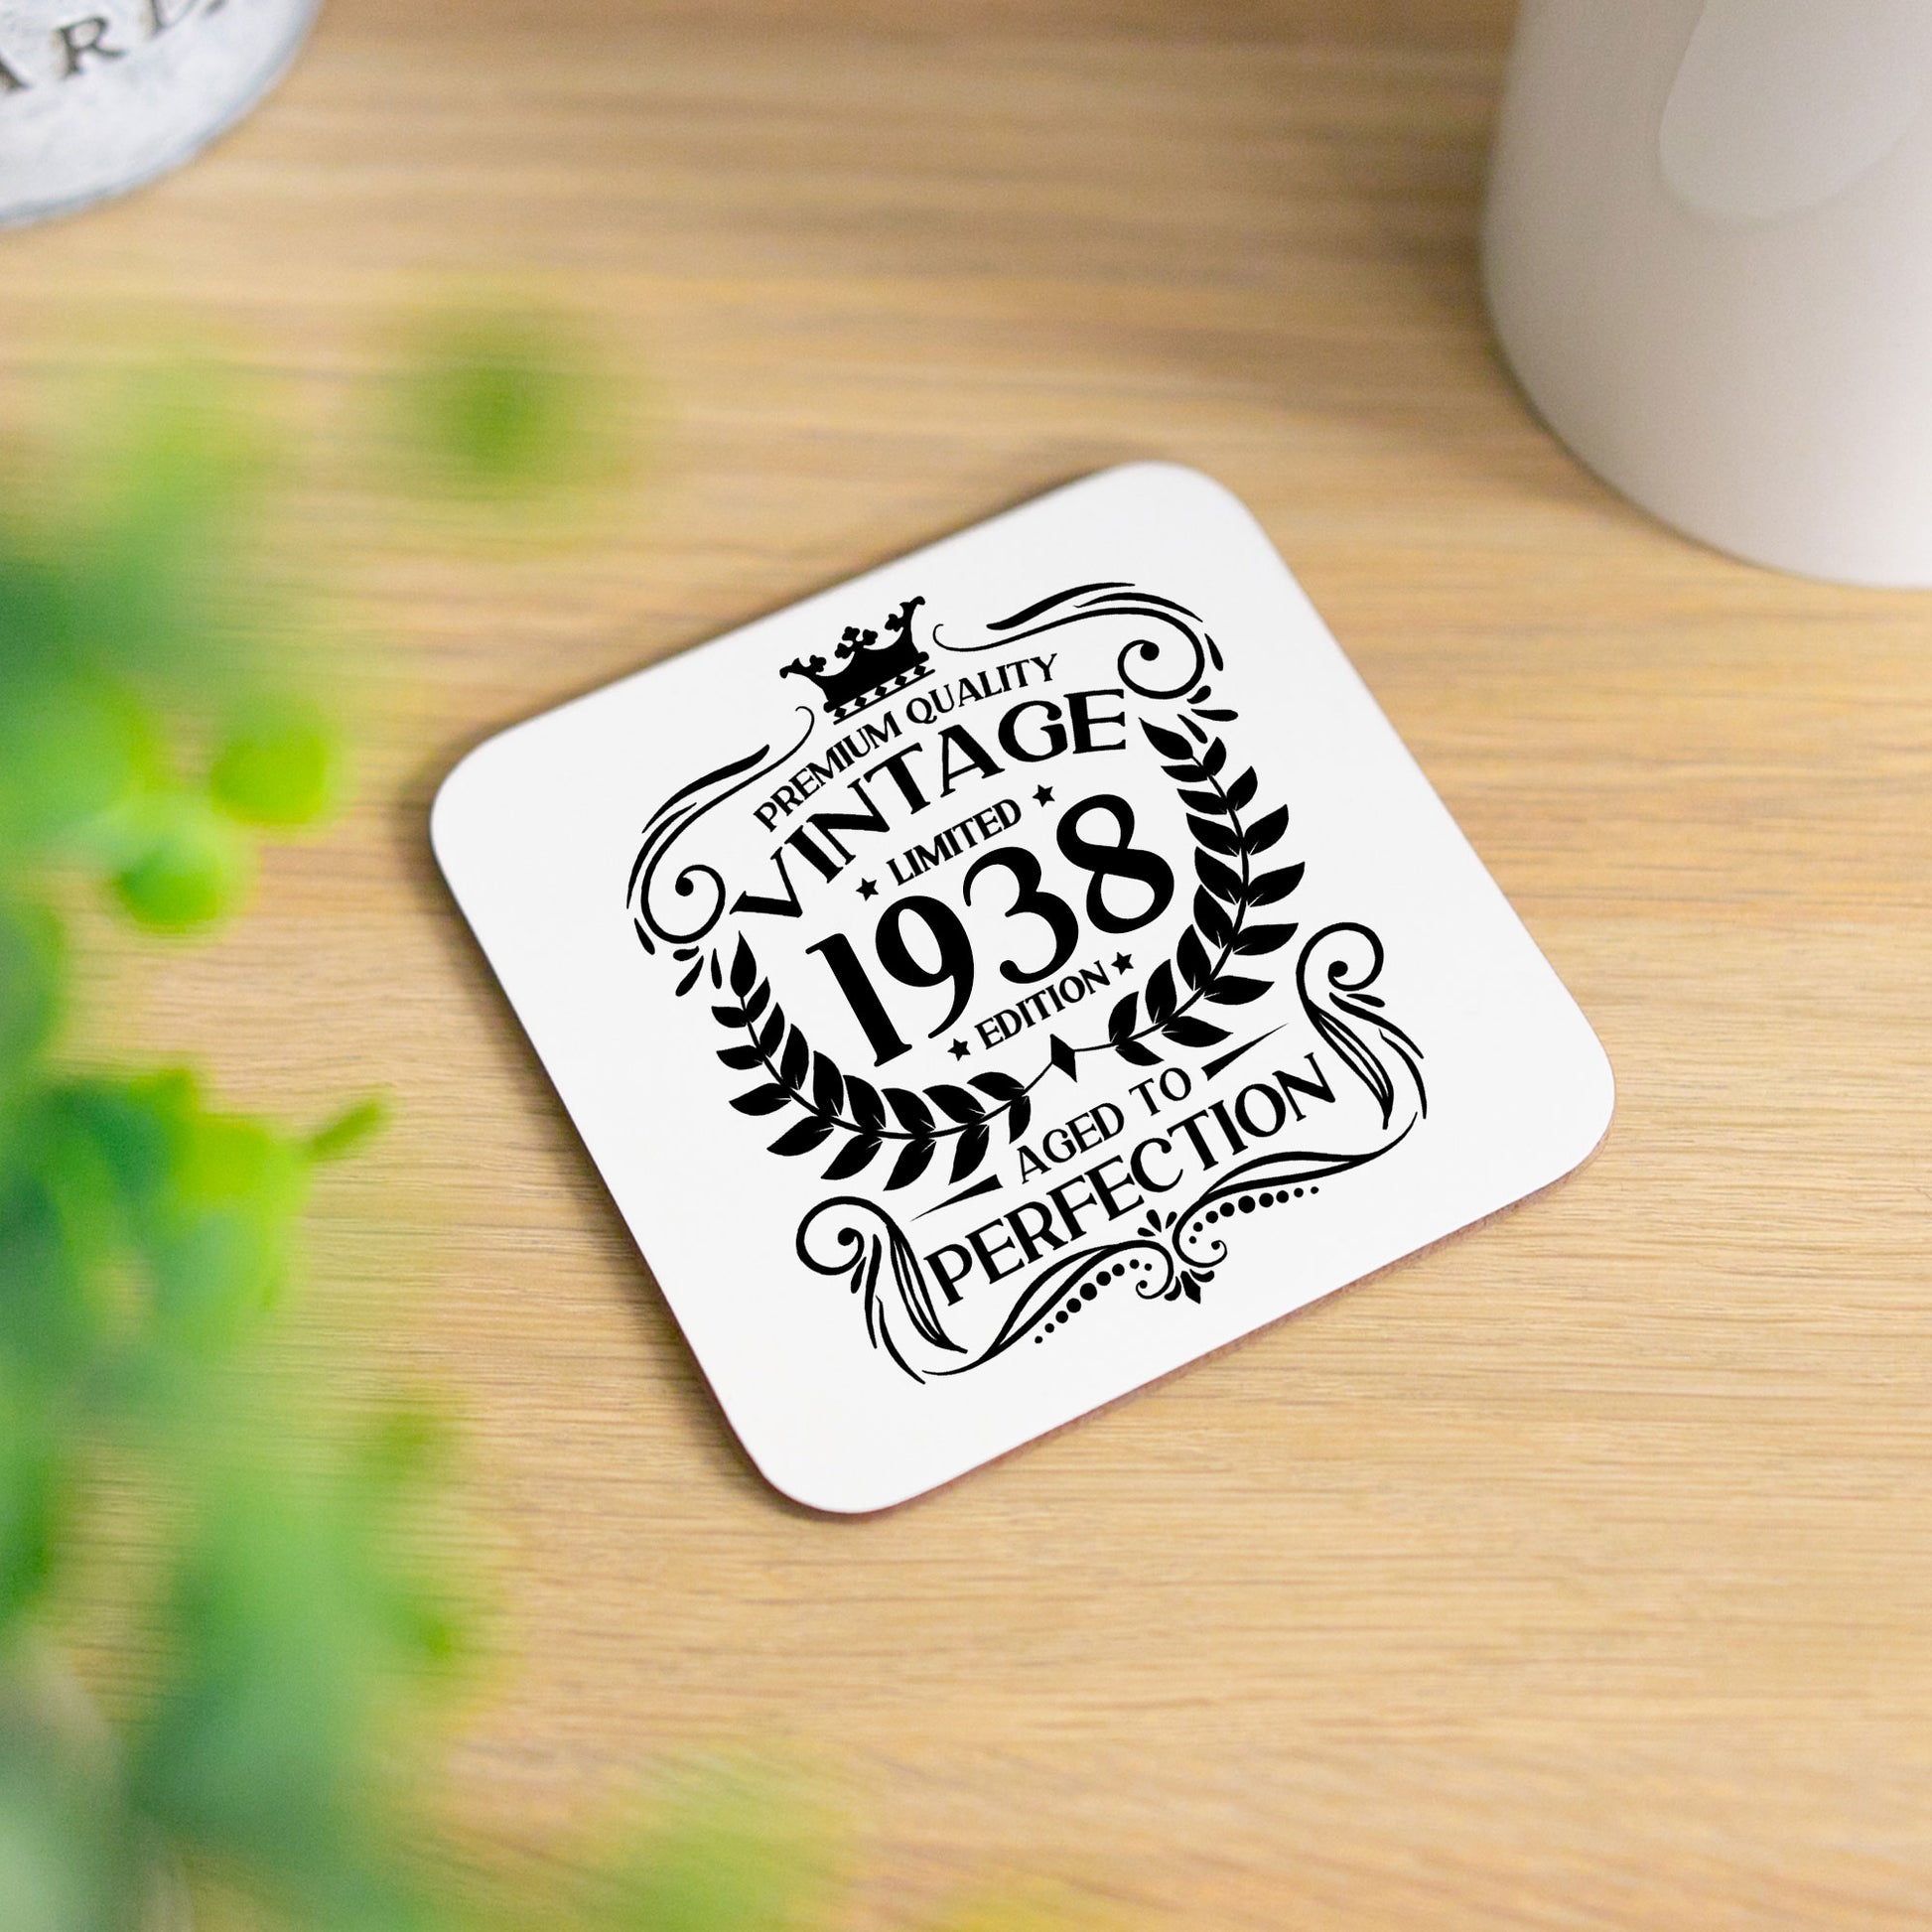 Vintage 1938 85th Birthday Engraved Wine Glass Gift  - Always Looking Good - Glass & Printed Coaster  